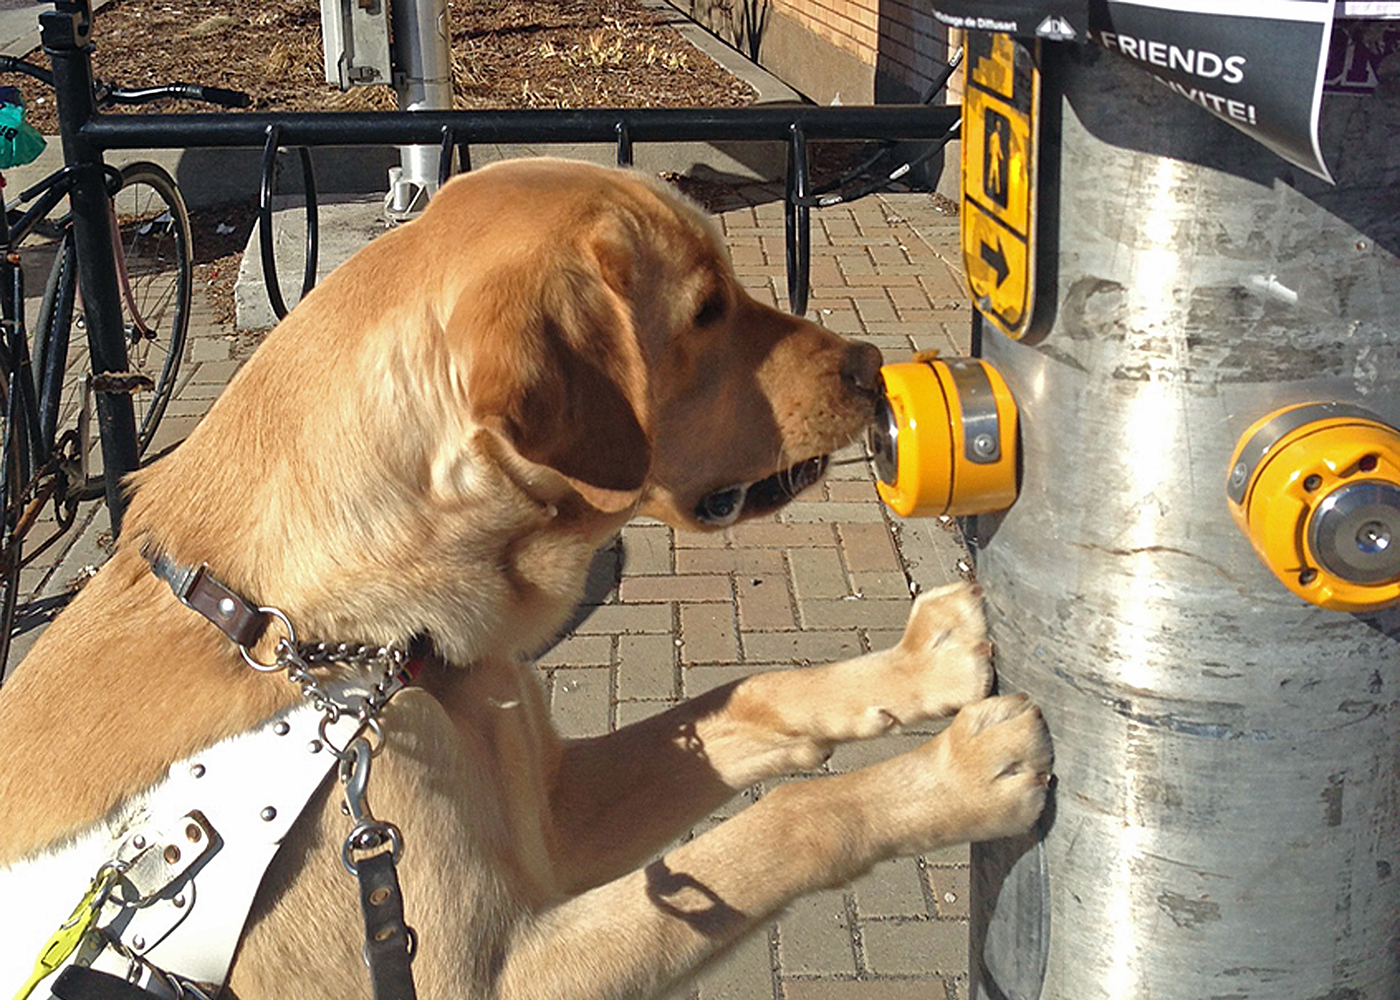 An image of a yellow lab guide dog pressing the crosswalk button with his nose